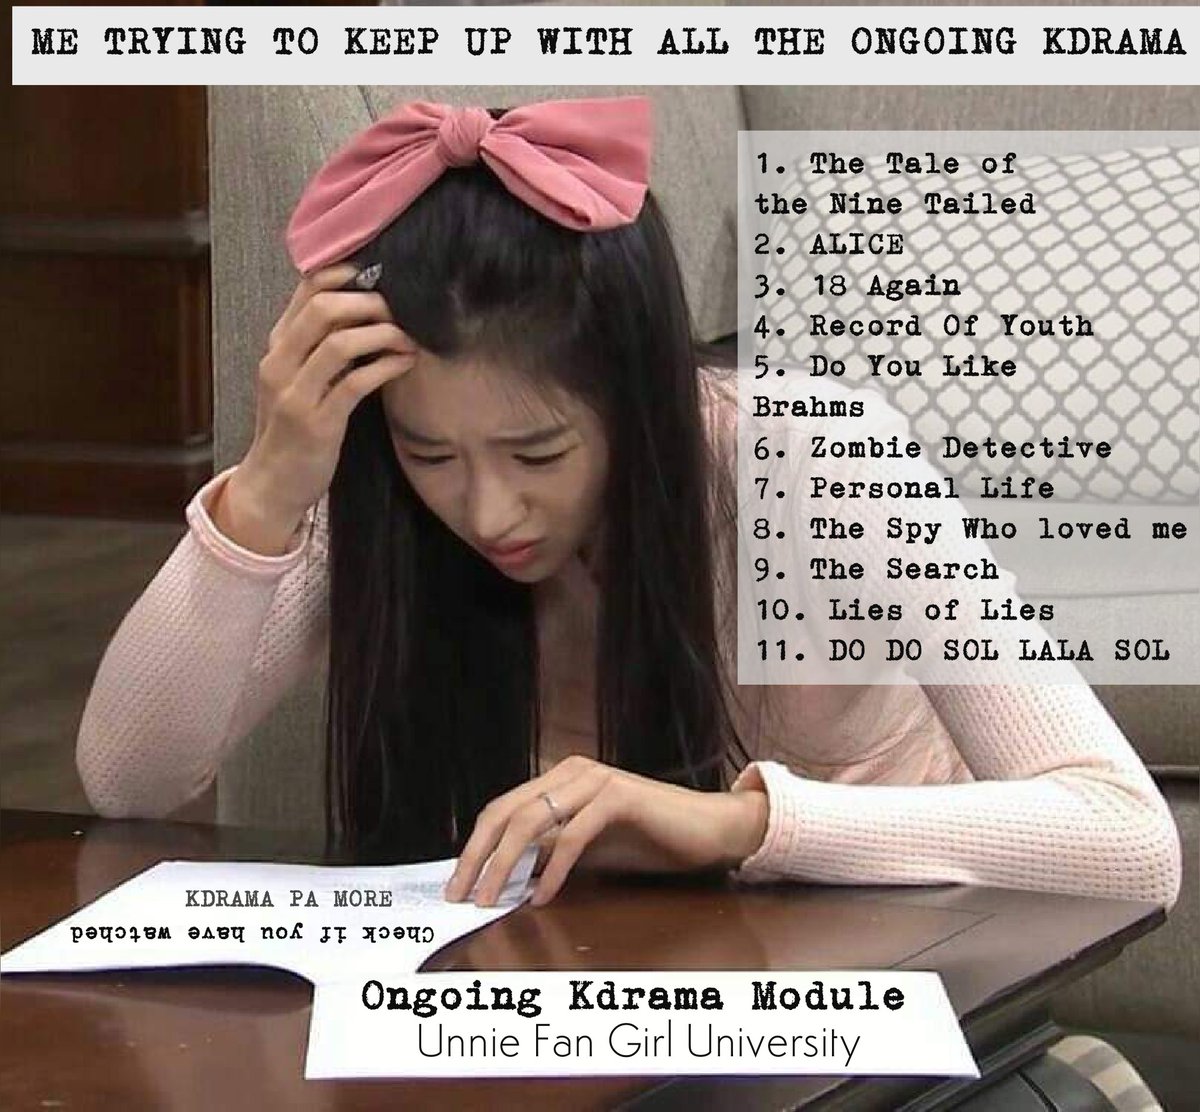 Me Trying to Keep up with all the #OngoingKdrama MY MODULE STORY #moduleserye 🤣🤣🤣🤣

#TaleoftheNineTailed #thesearch #ALICE #18Again #RecordOfYouth #DoYouLikeBrahms #thespywholovedme #ZombieDetective #LiesofLies #DoDoSolSolLaLaSol #Personallife